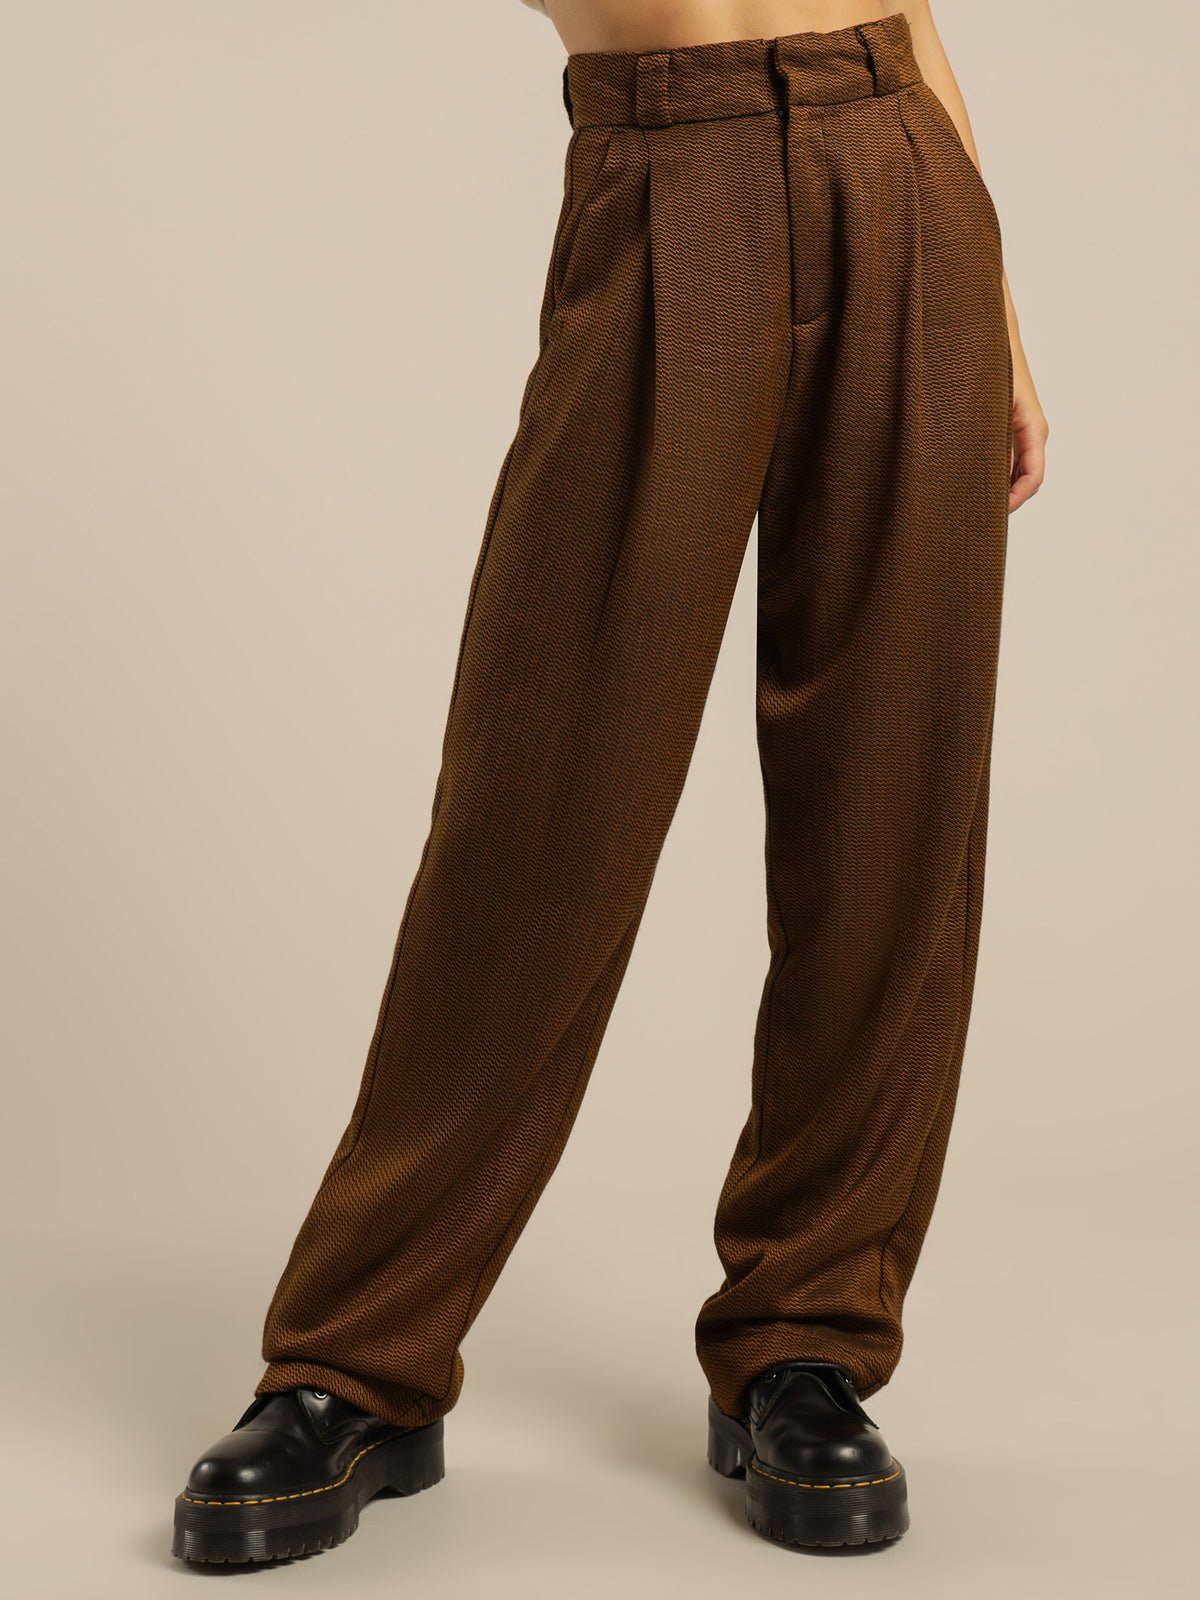 Restraint Tapered Pant in Gold